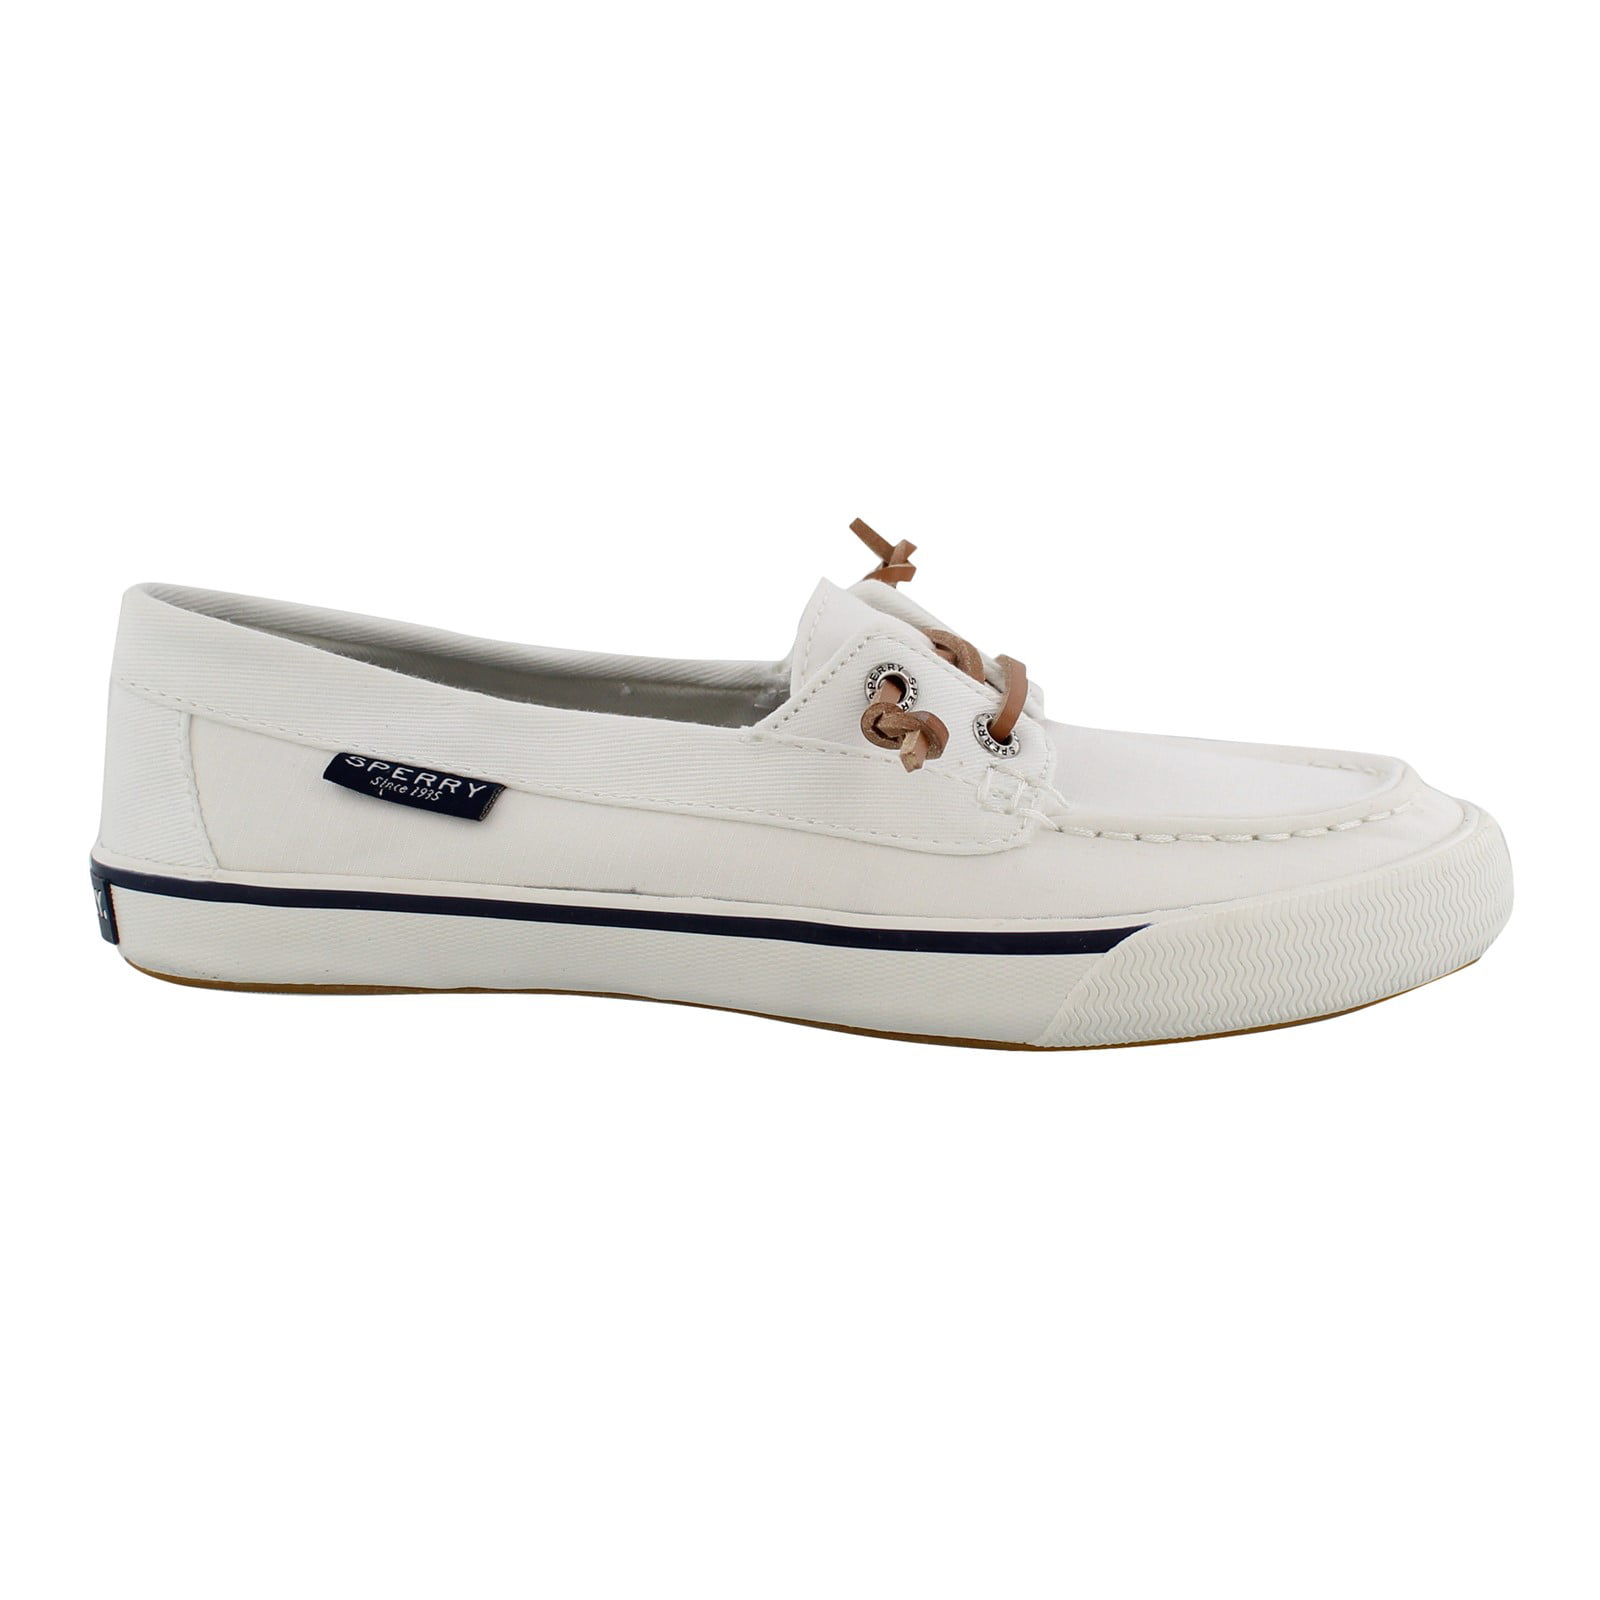 Lounge Away Boat Shoes Rose 8 M Sperry Womens 